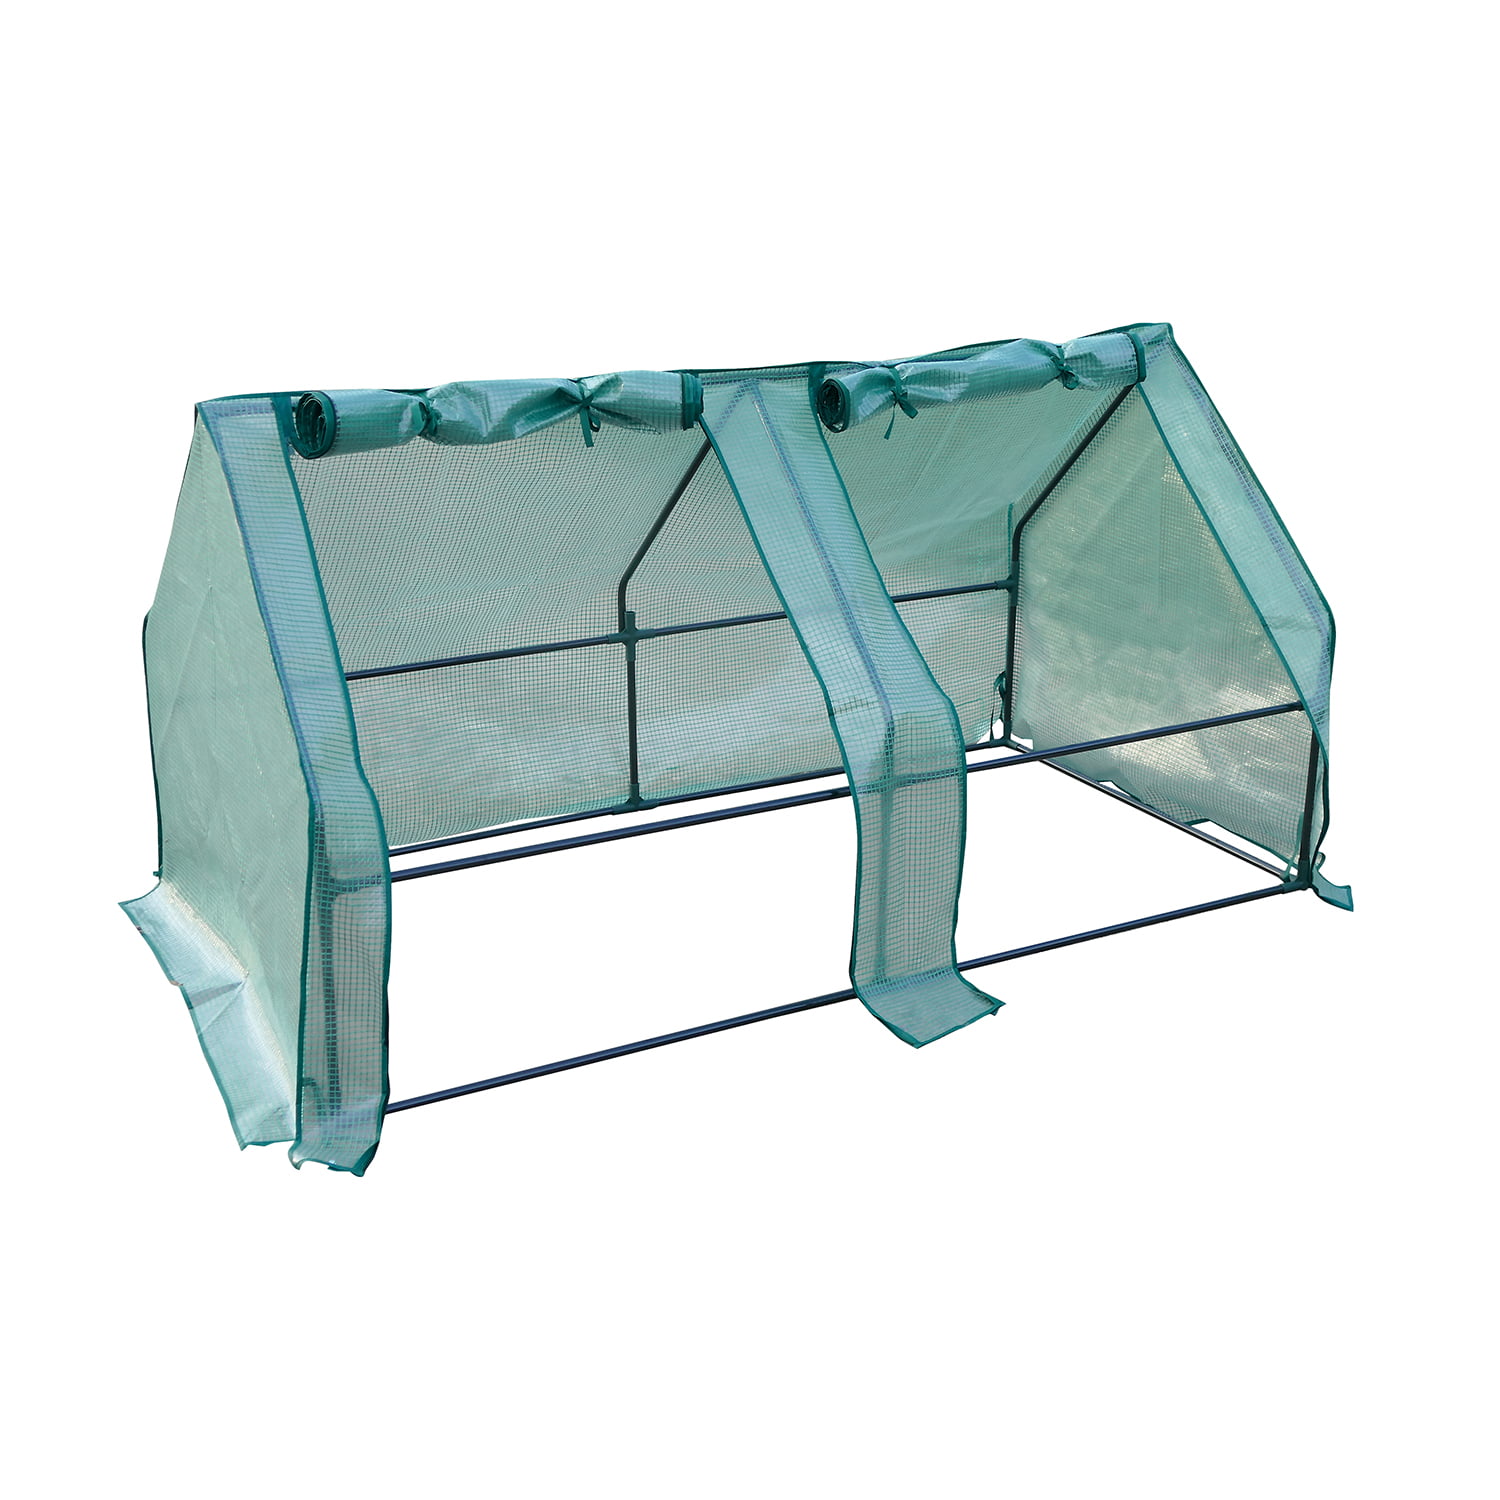 Rural365Portable Greenhouse for Outdoors Green House with Roll Up Doors 